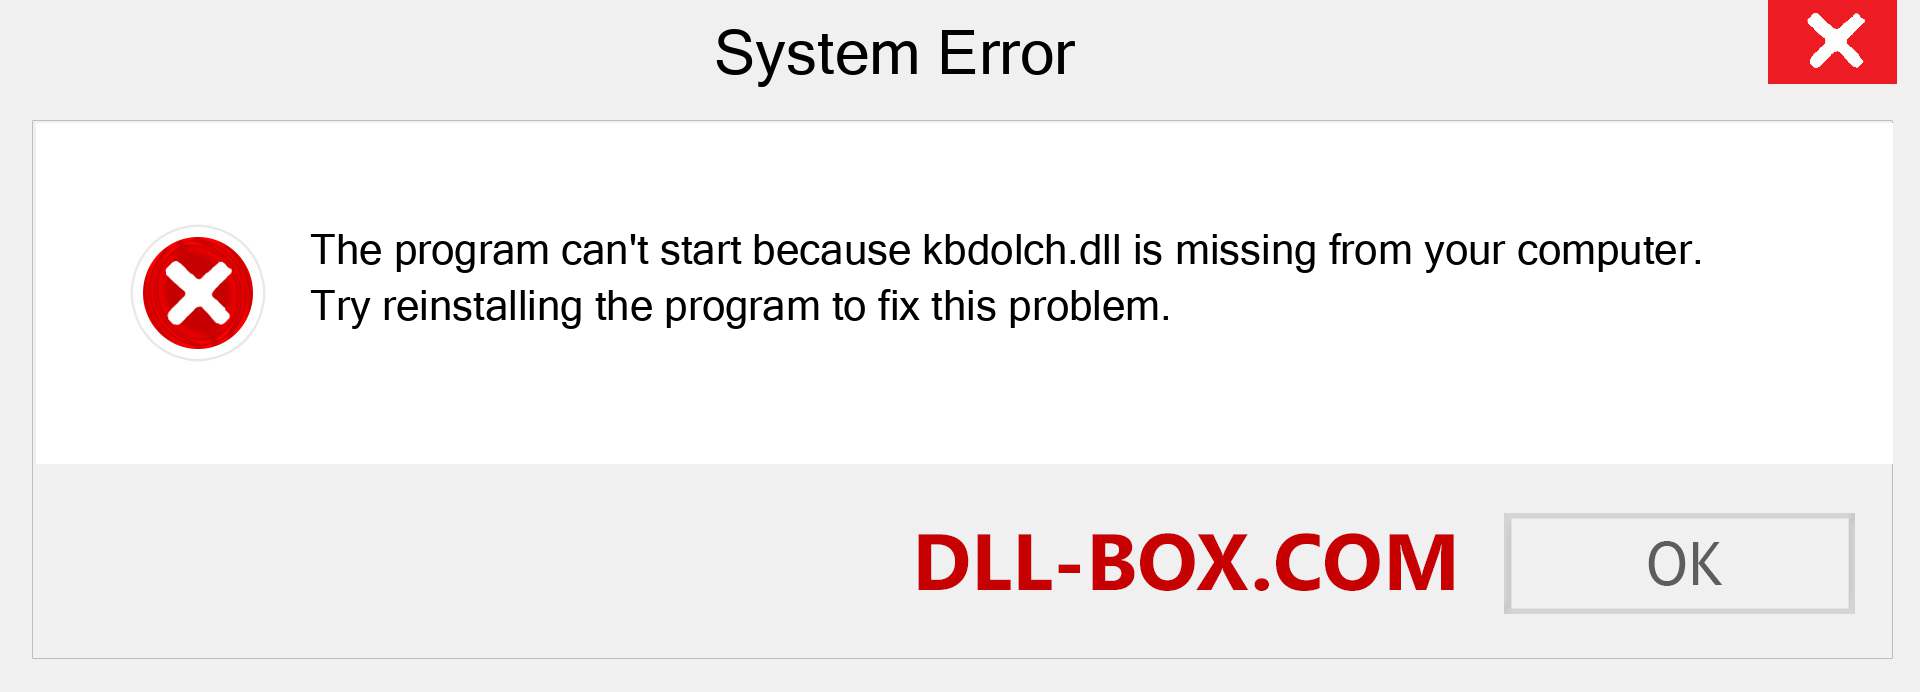  kbdolch.dll file is missing?. Download for Windows 7, 8, 10 - Fix  kbdolch dll Missing Error on Windows, photos, images